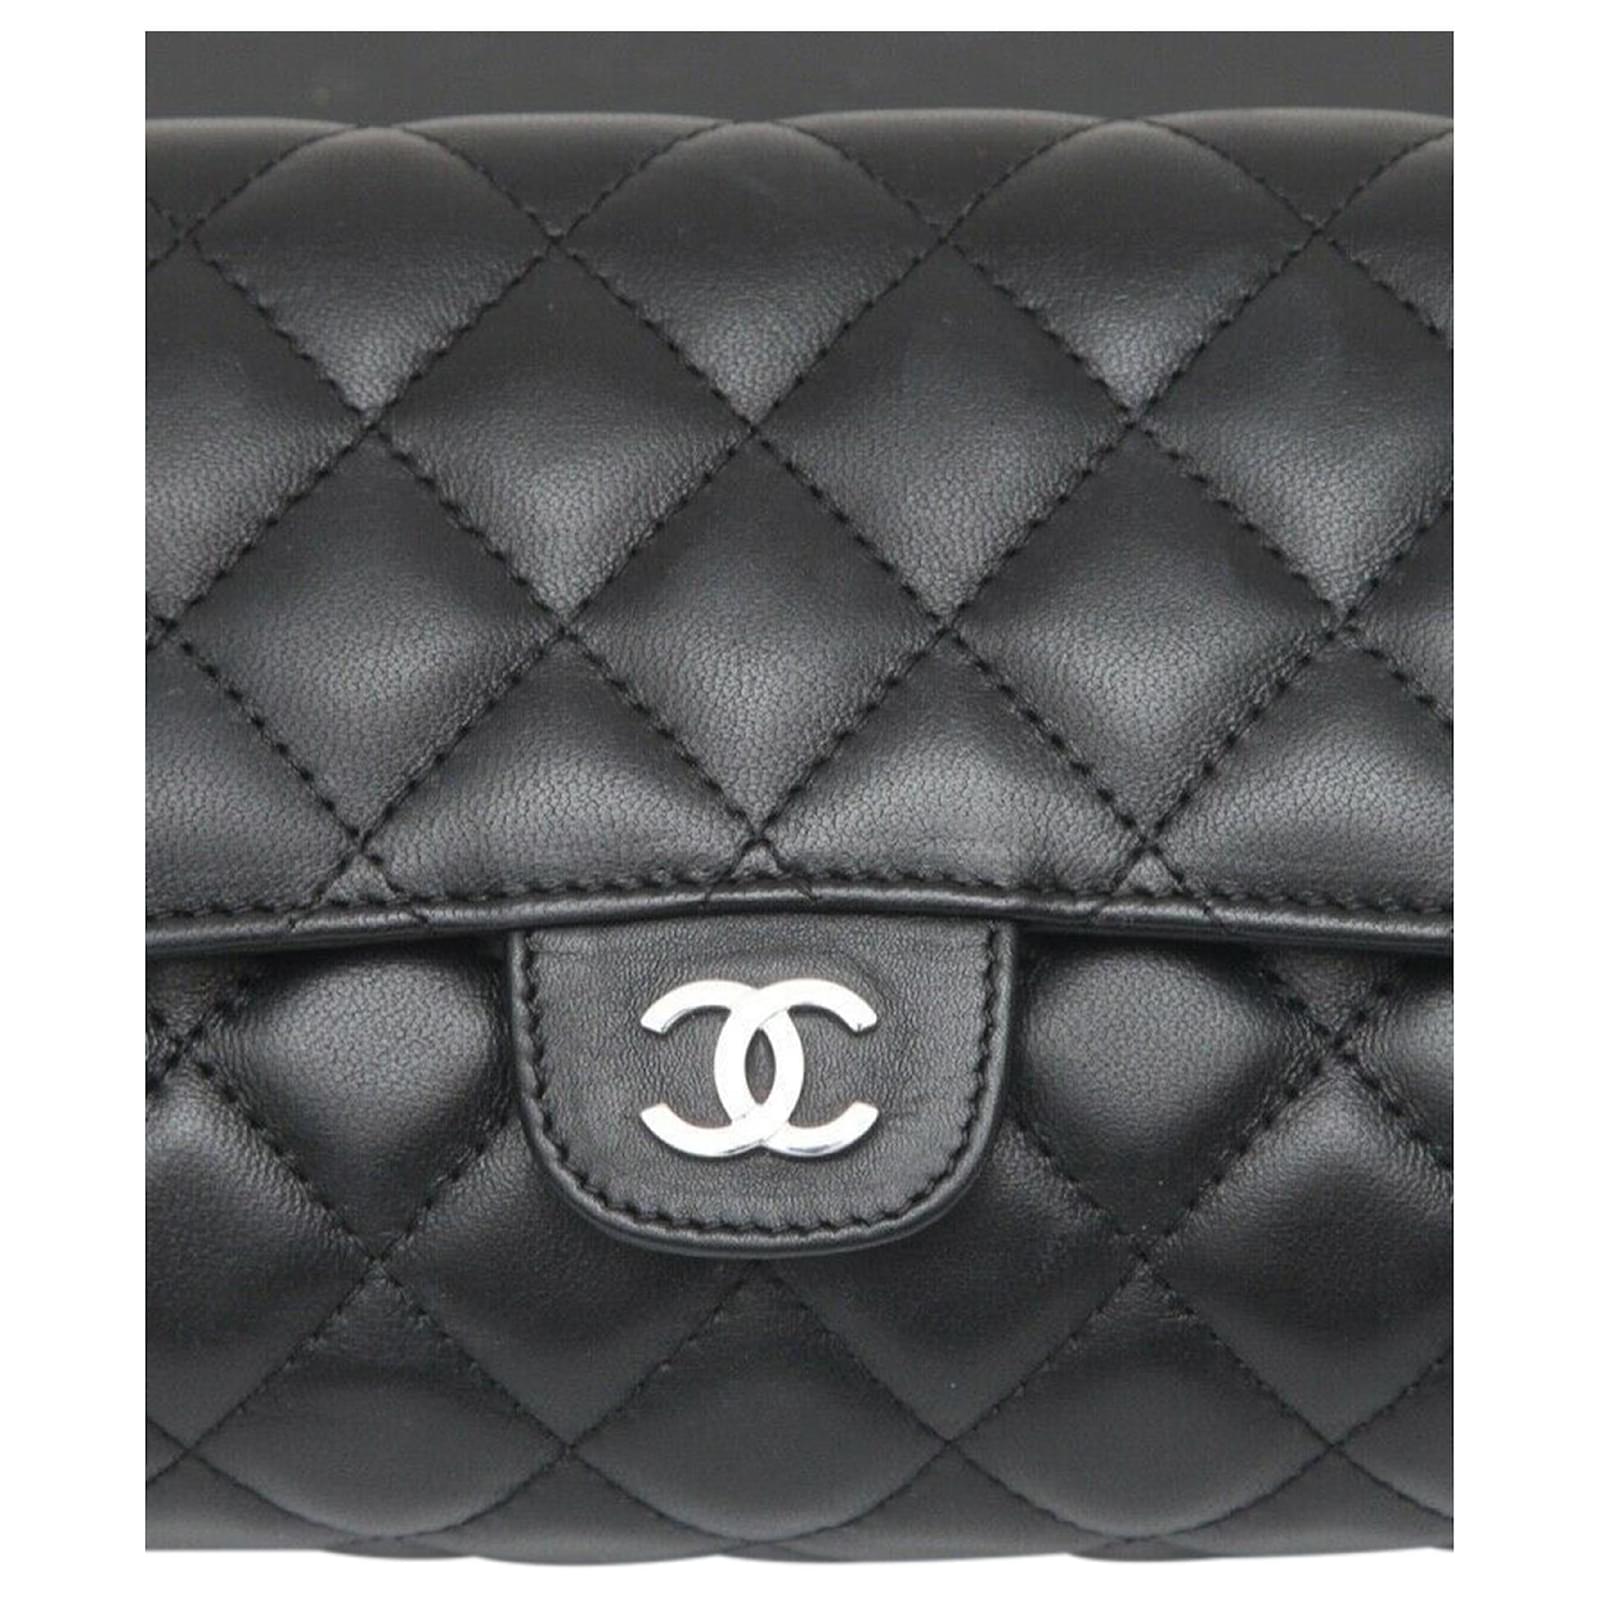 Chanel Chanel Black Lambskin Leather Quilted O-case Clutch Bag